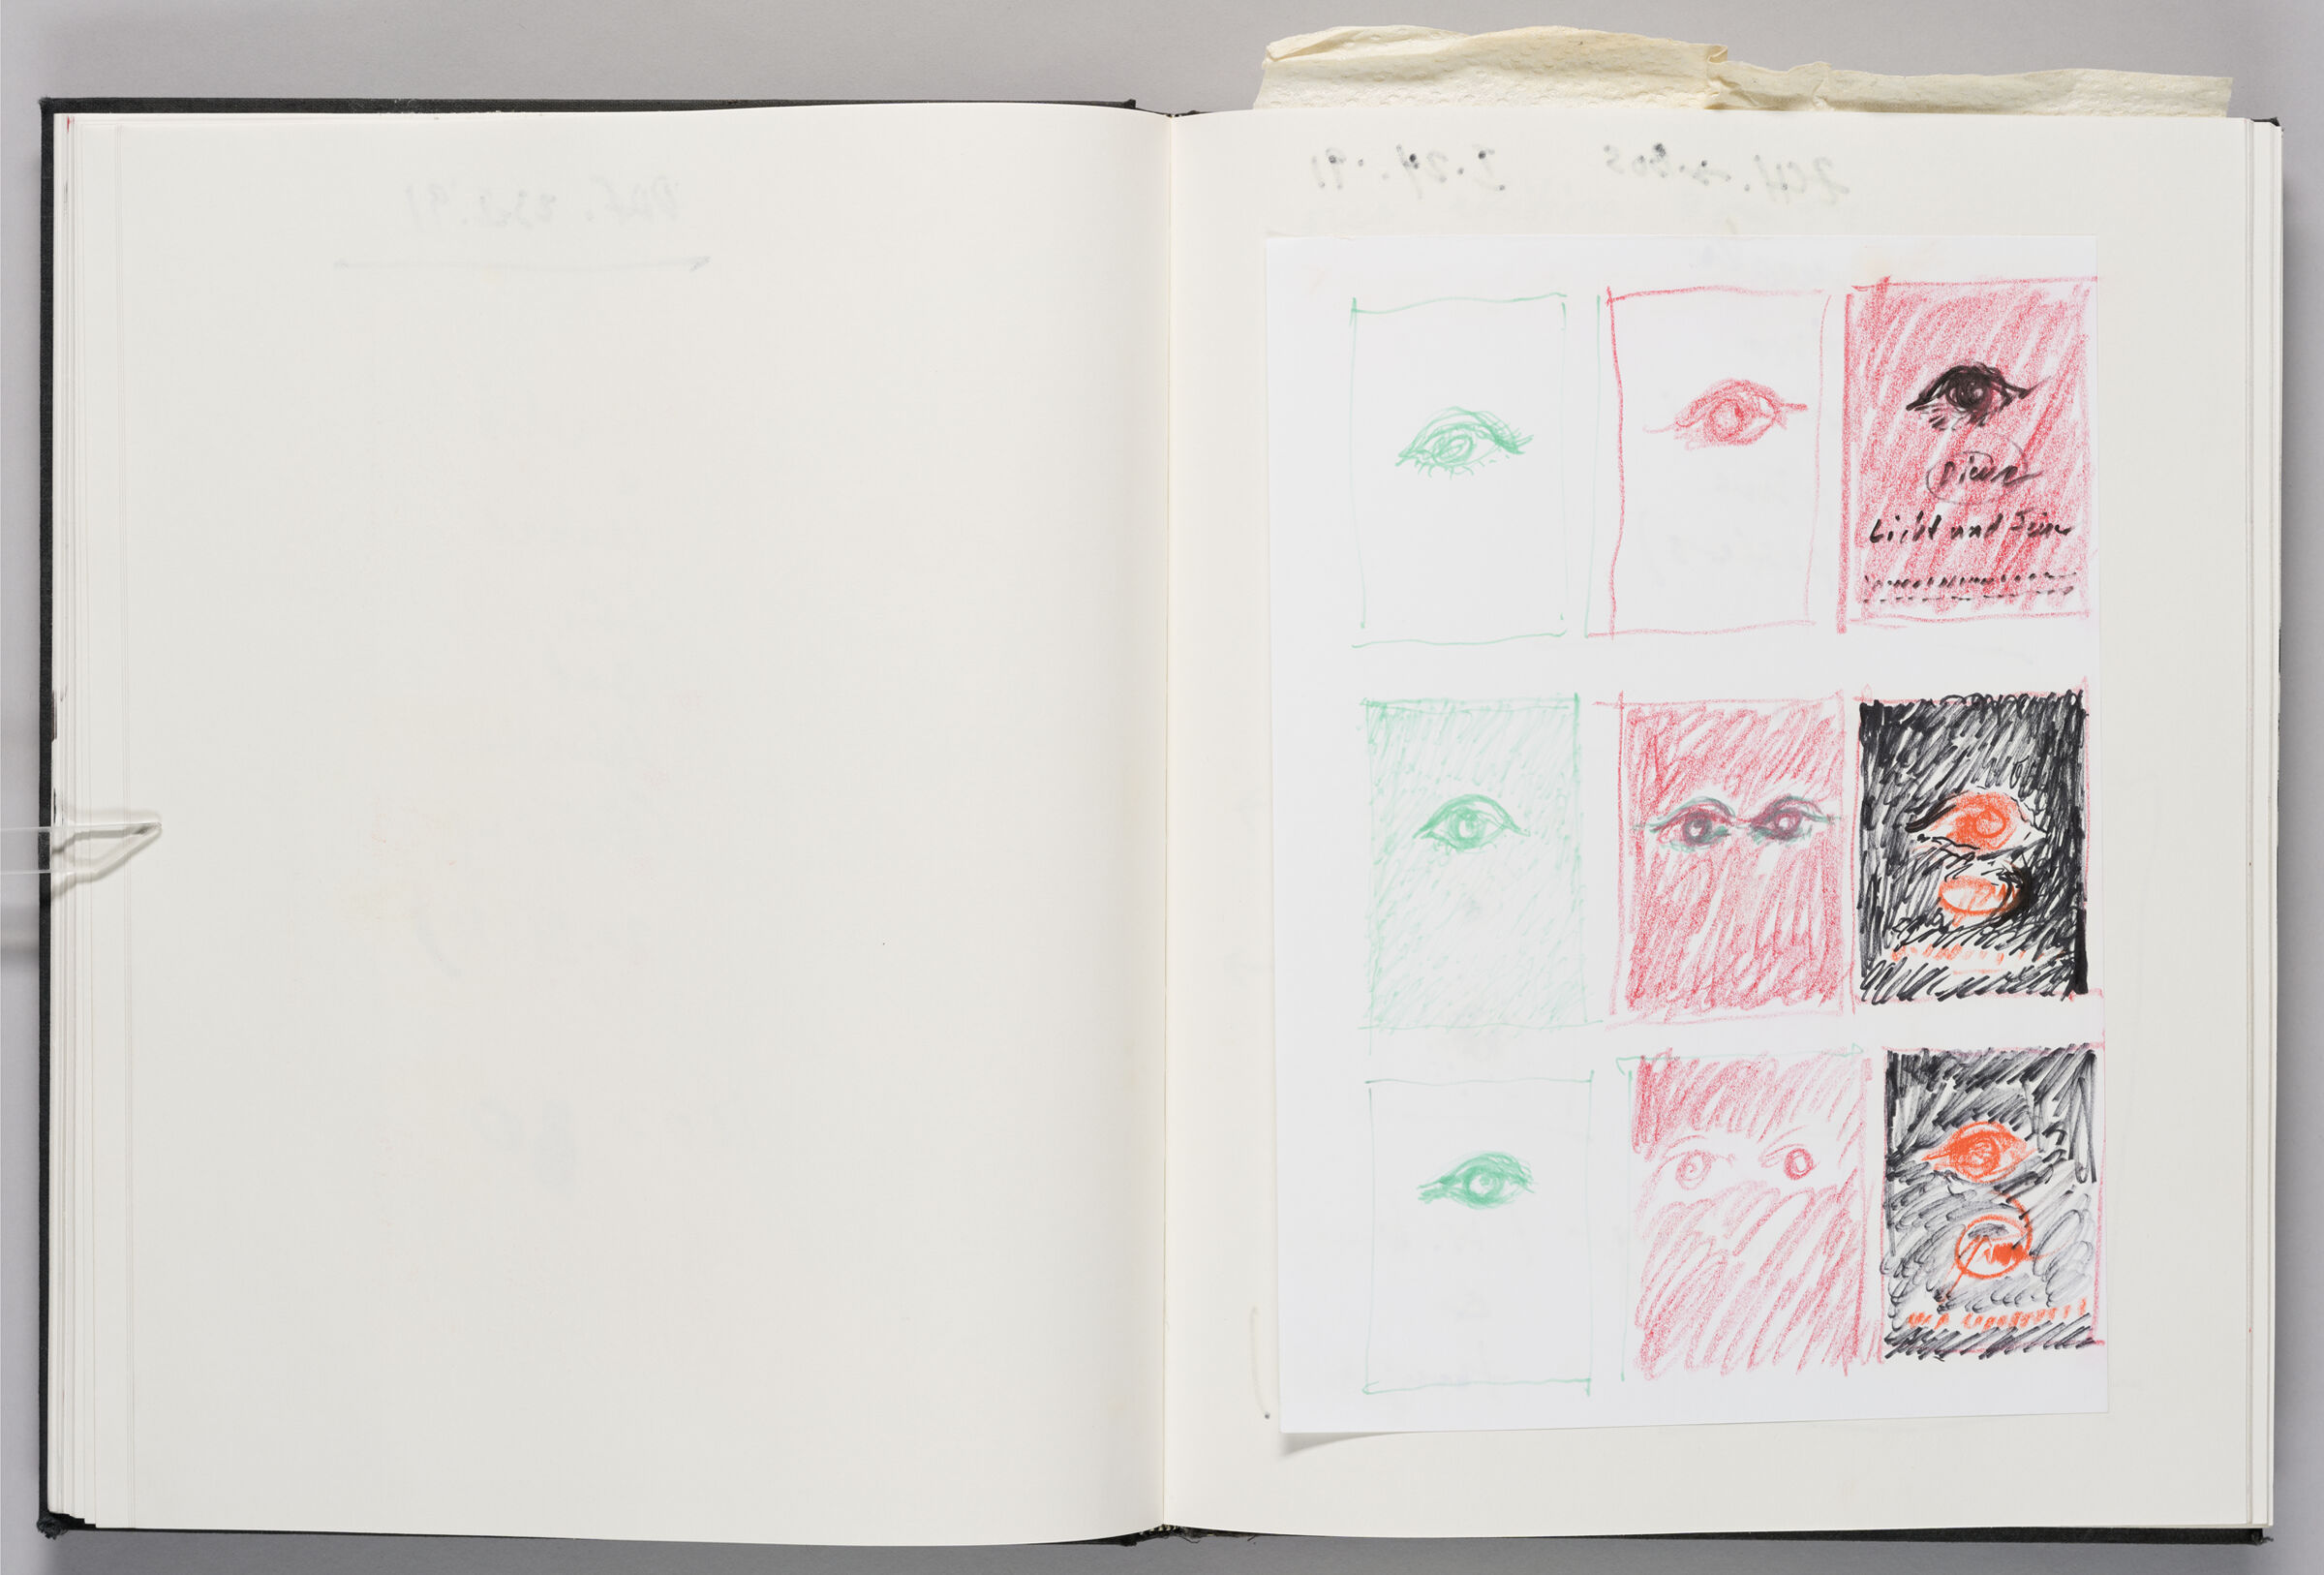 Untitled (Bleed-Through Of Previous Page, Left Page); Untitled (Designs For Exhibition Poster On Adhered Sheet Of Paper, Right Page)